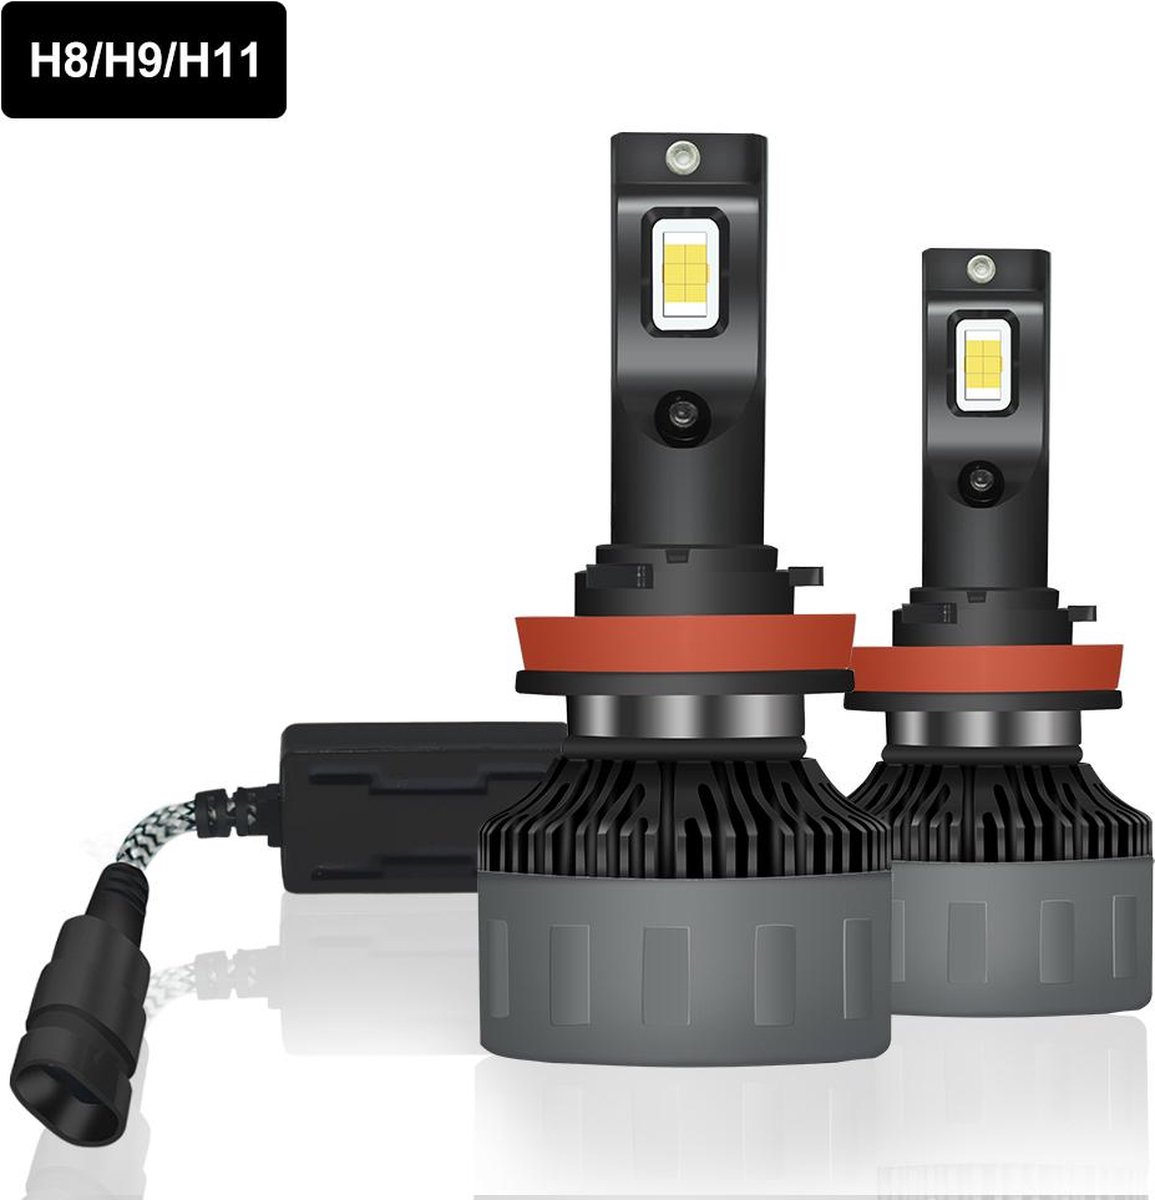 H11 Perfect Fit LED Canbus Line - Perfect Fit LED Canbus Line -  TopLEDverlichting: LED en Xenon verlichting voor auto's, motoren, scooters.